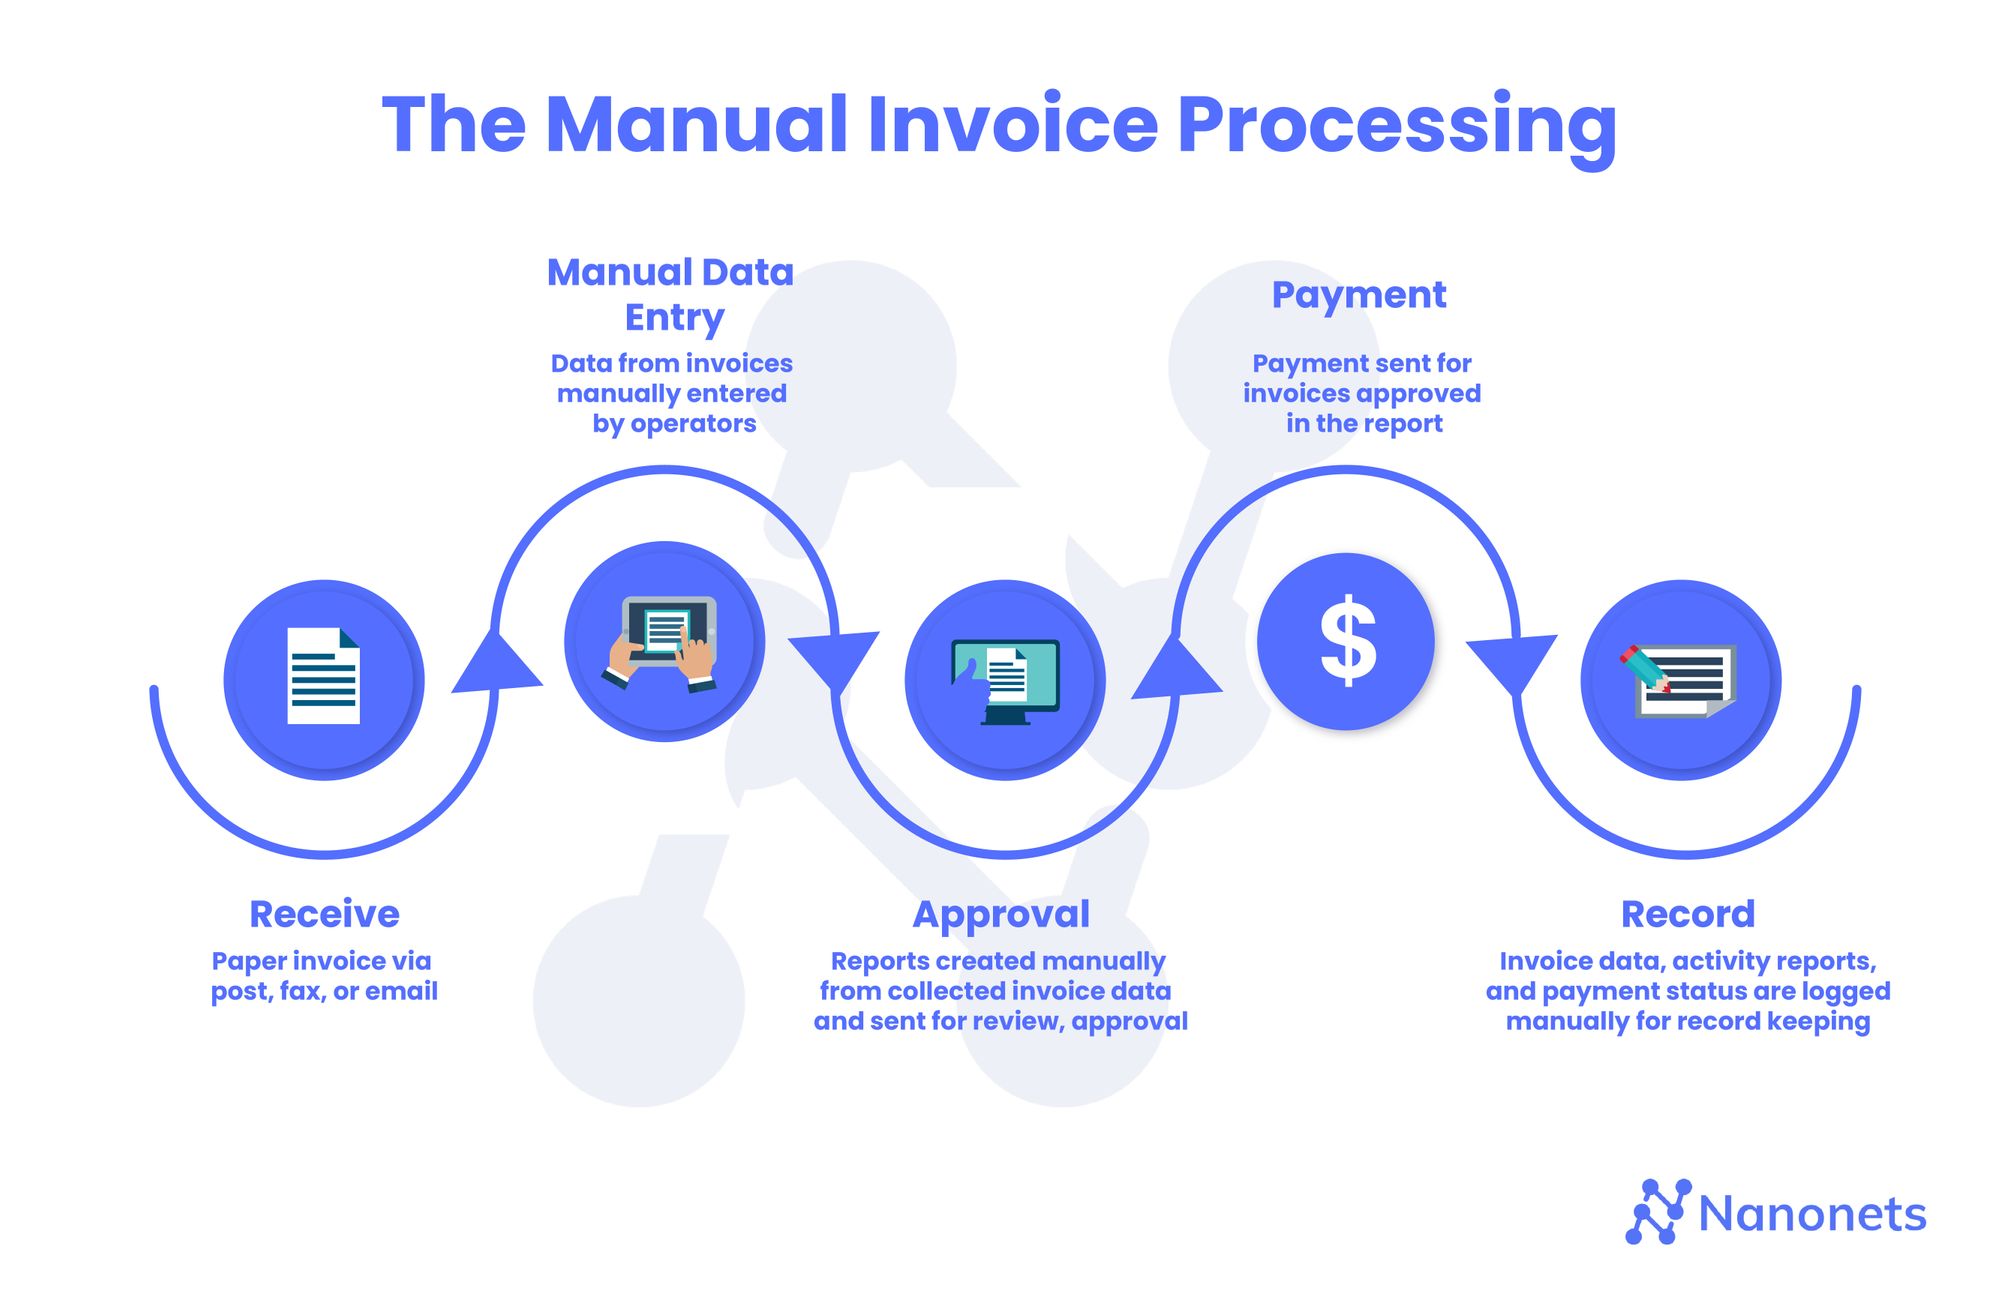 What is Invoice Processing & What Key Steps are Involved?